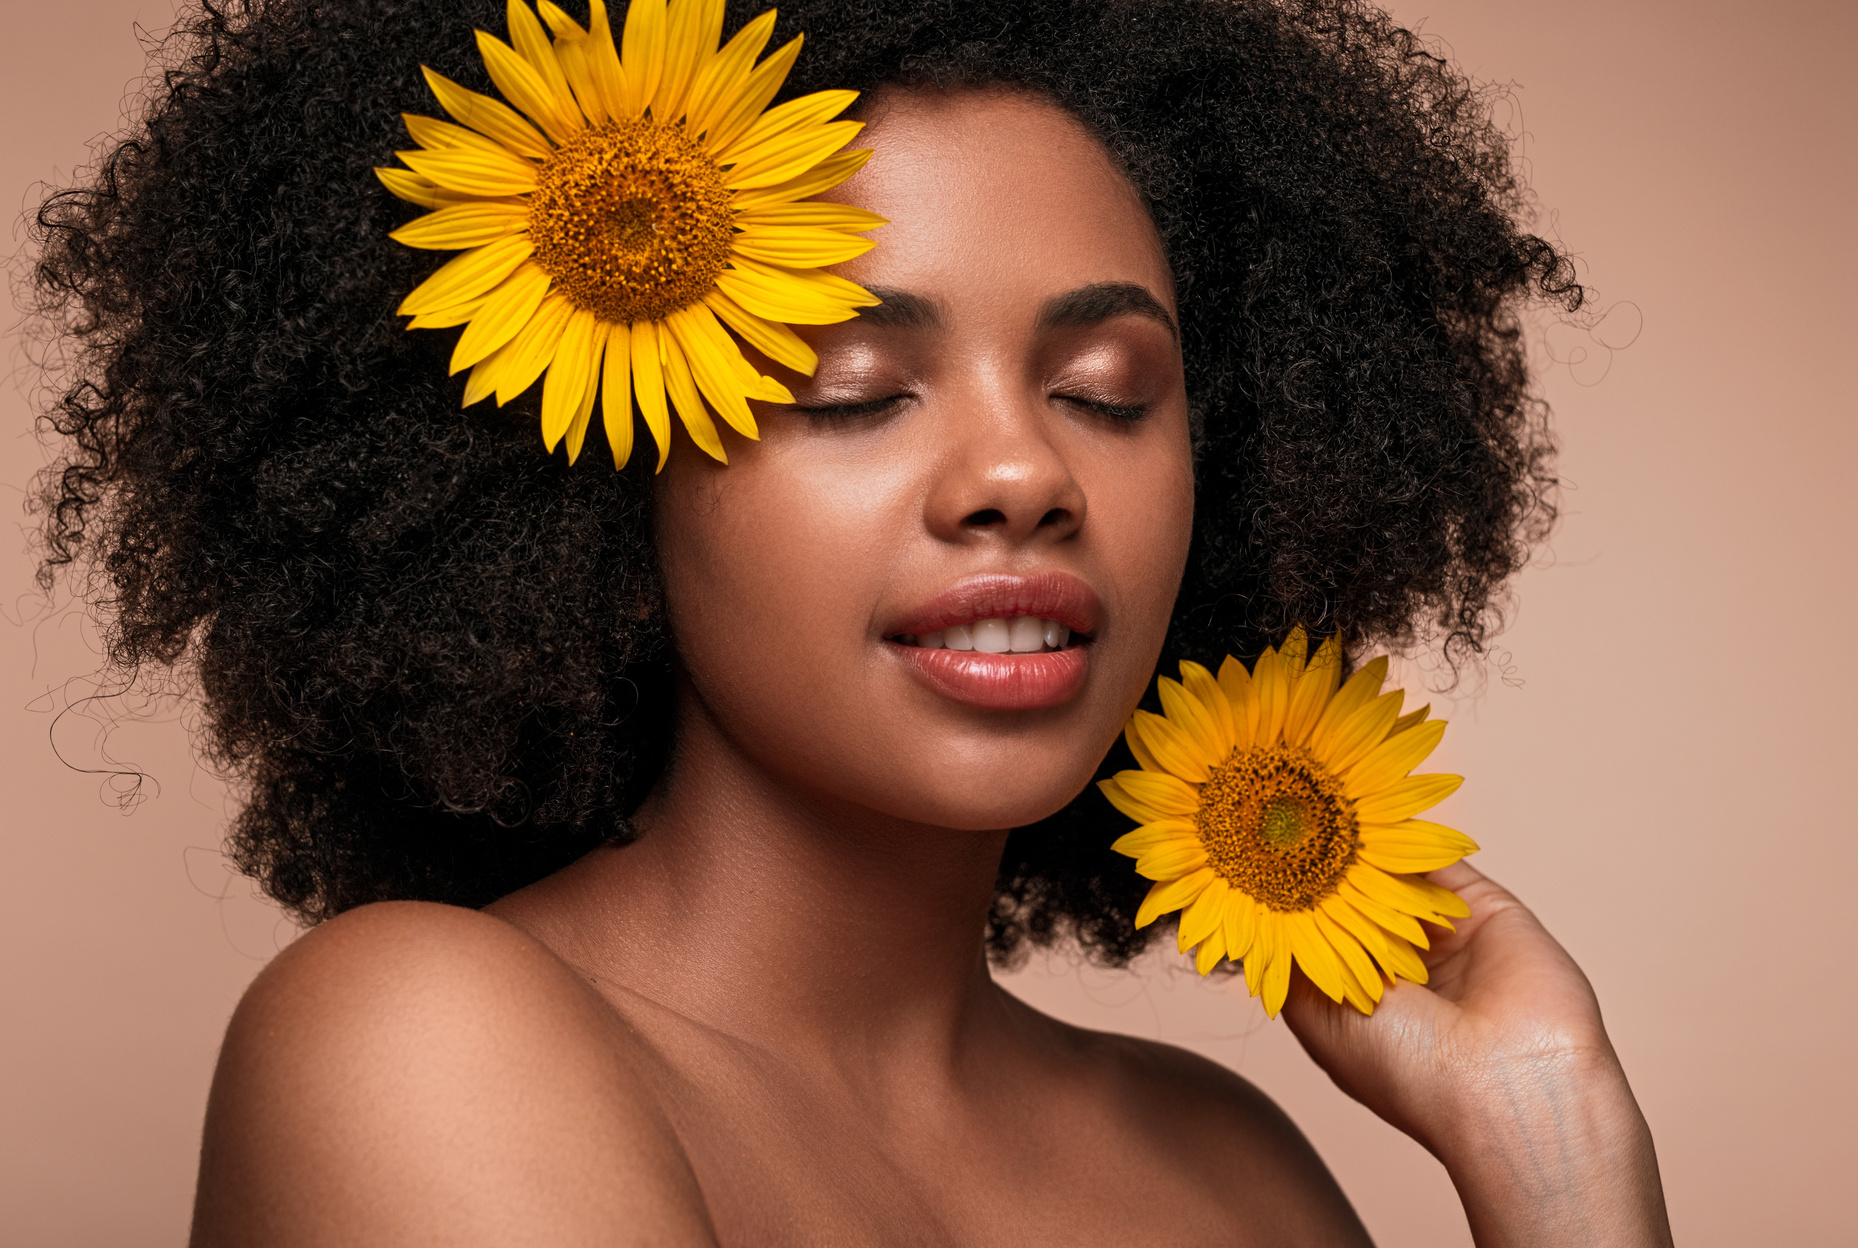 Black woman with sunflowers in hair